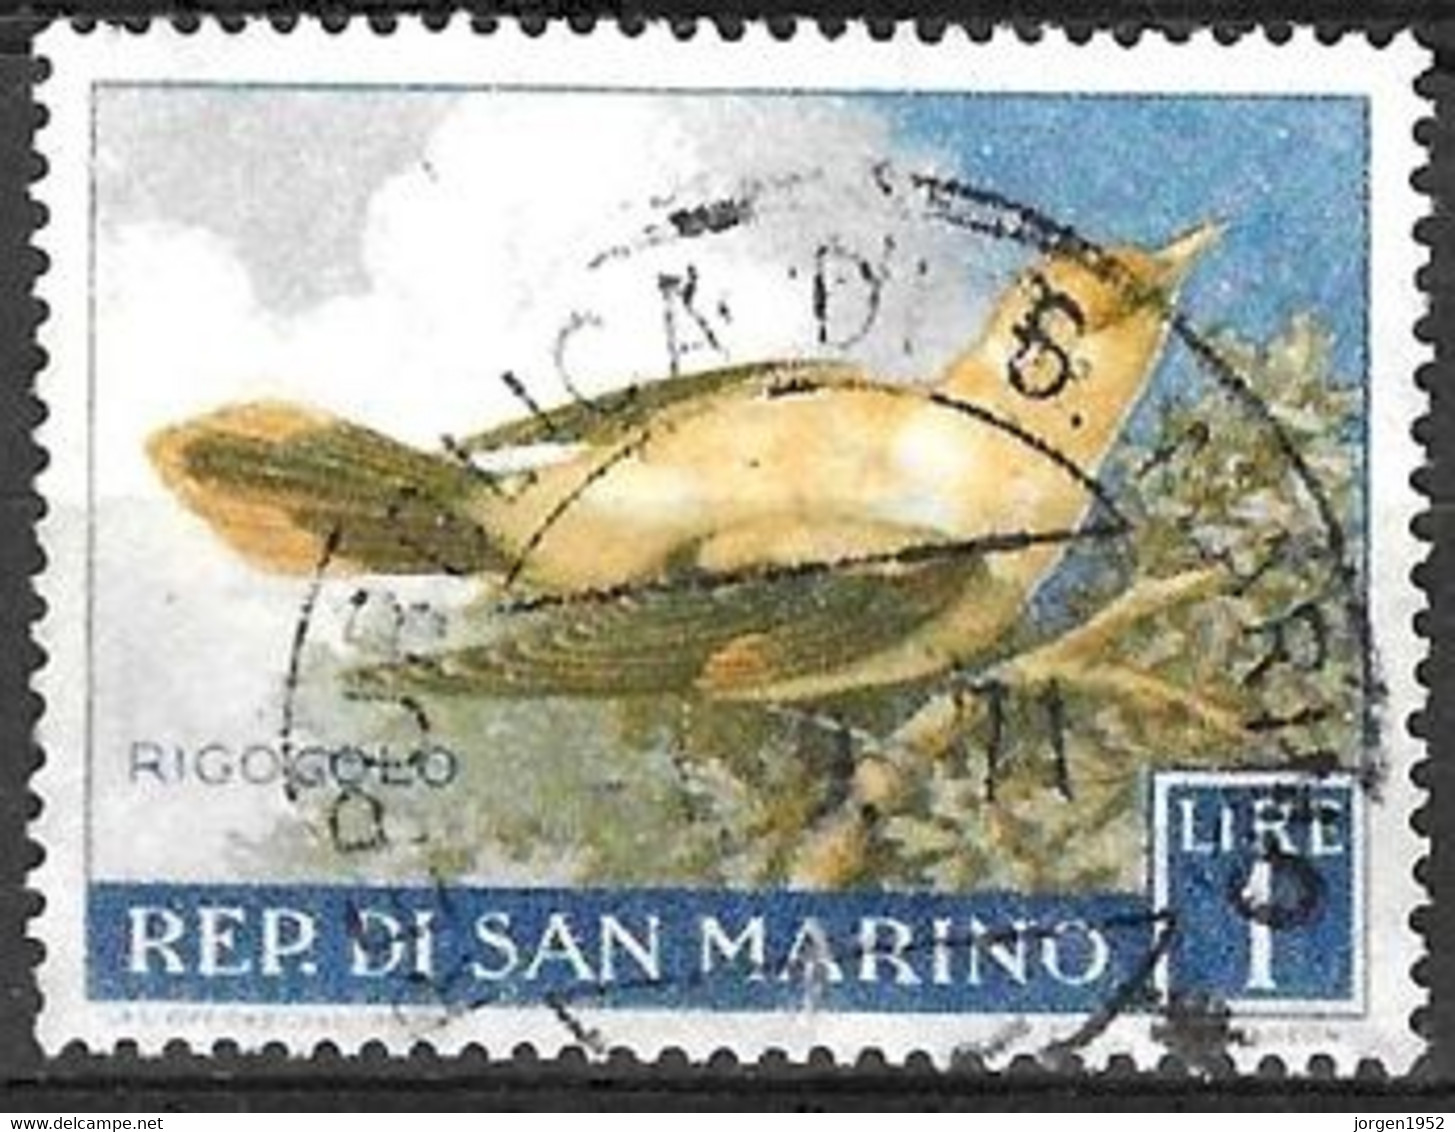 SAN MARINO # FROM 1960 STAMPWORLD  644 - Used Stamps